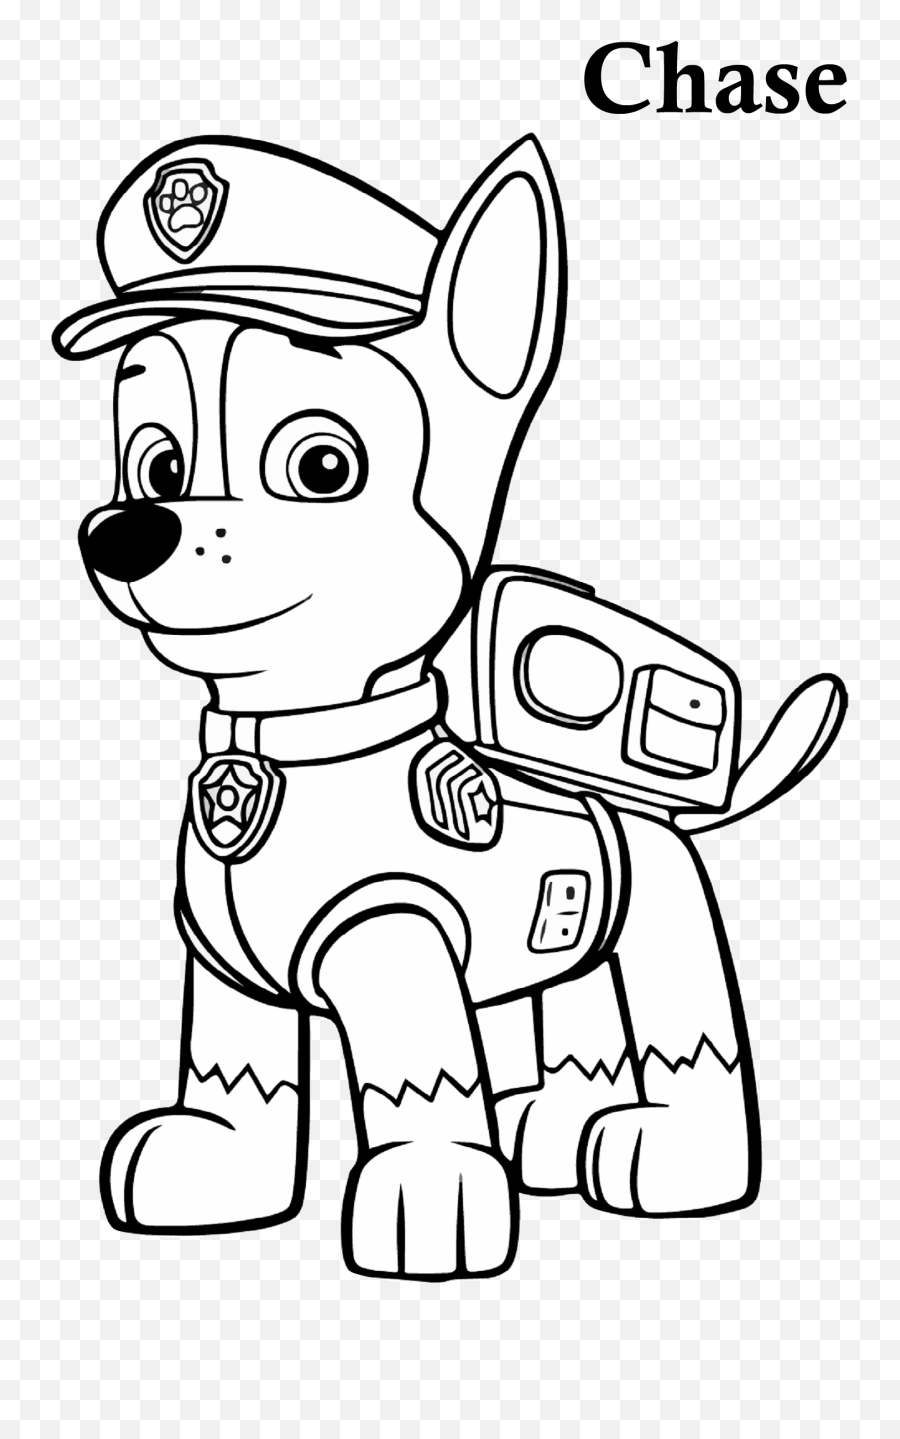 Paw Patrol Chase Online And - Free Printable Paw Patrol Coloring Pages Png,Paw Chase Png - free png images - pngaaa.com